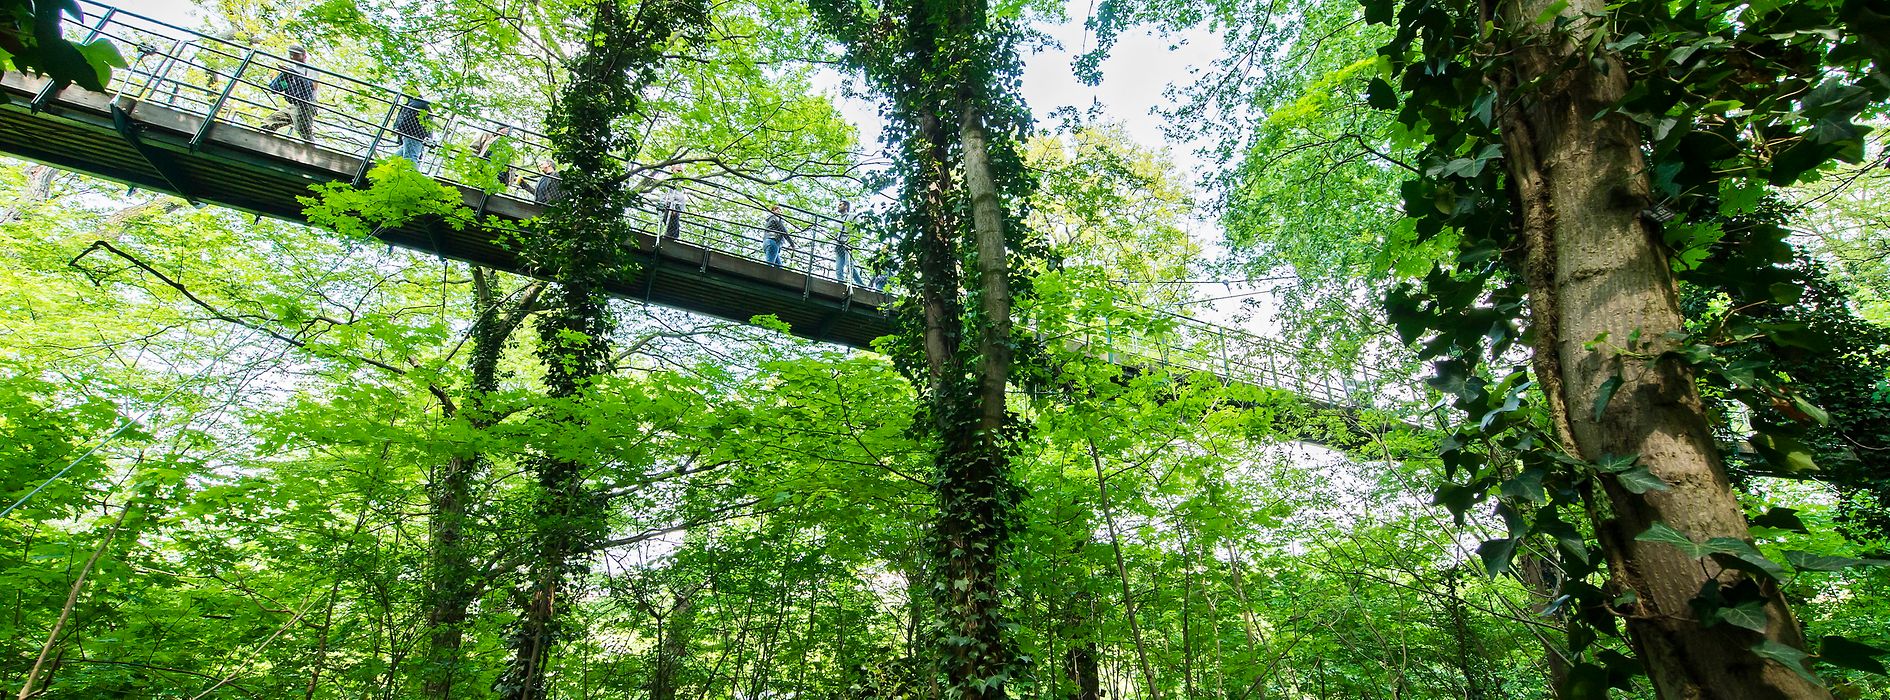 Suspension bridge and trees along the nature experience trail in Schönbrunn Zoo 